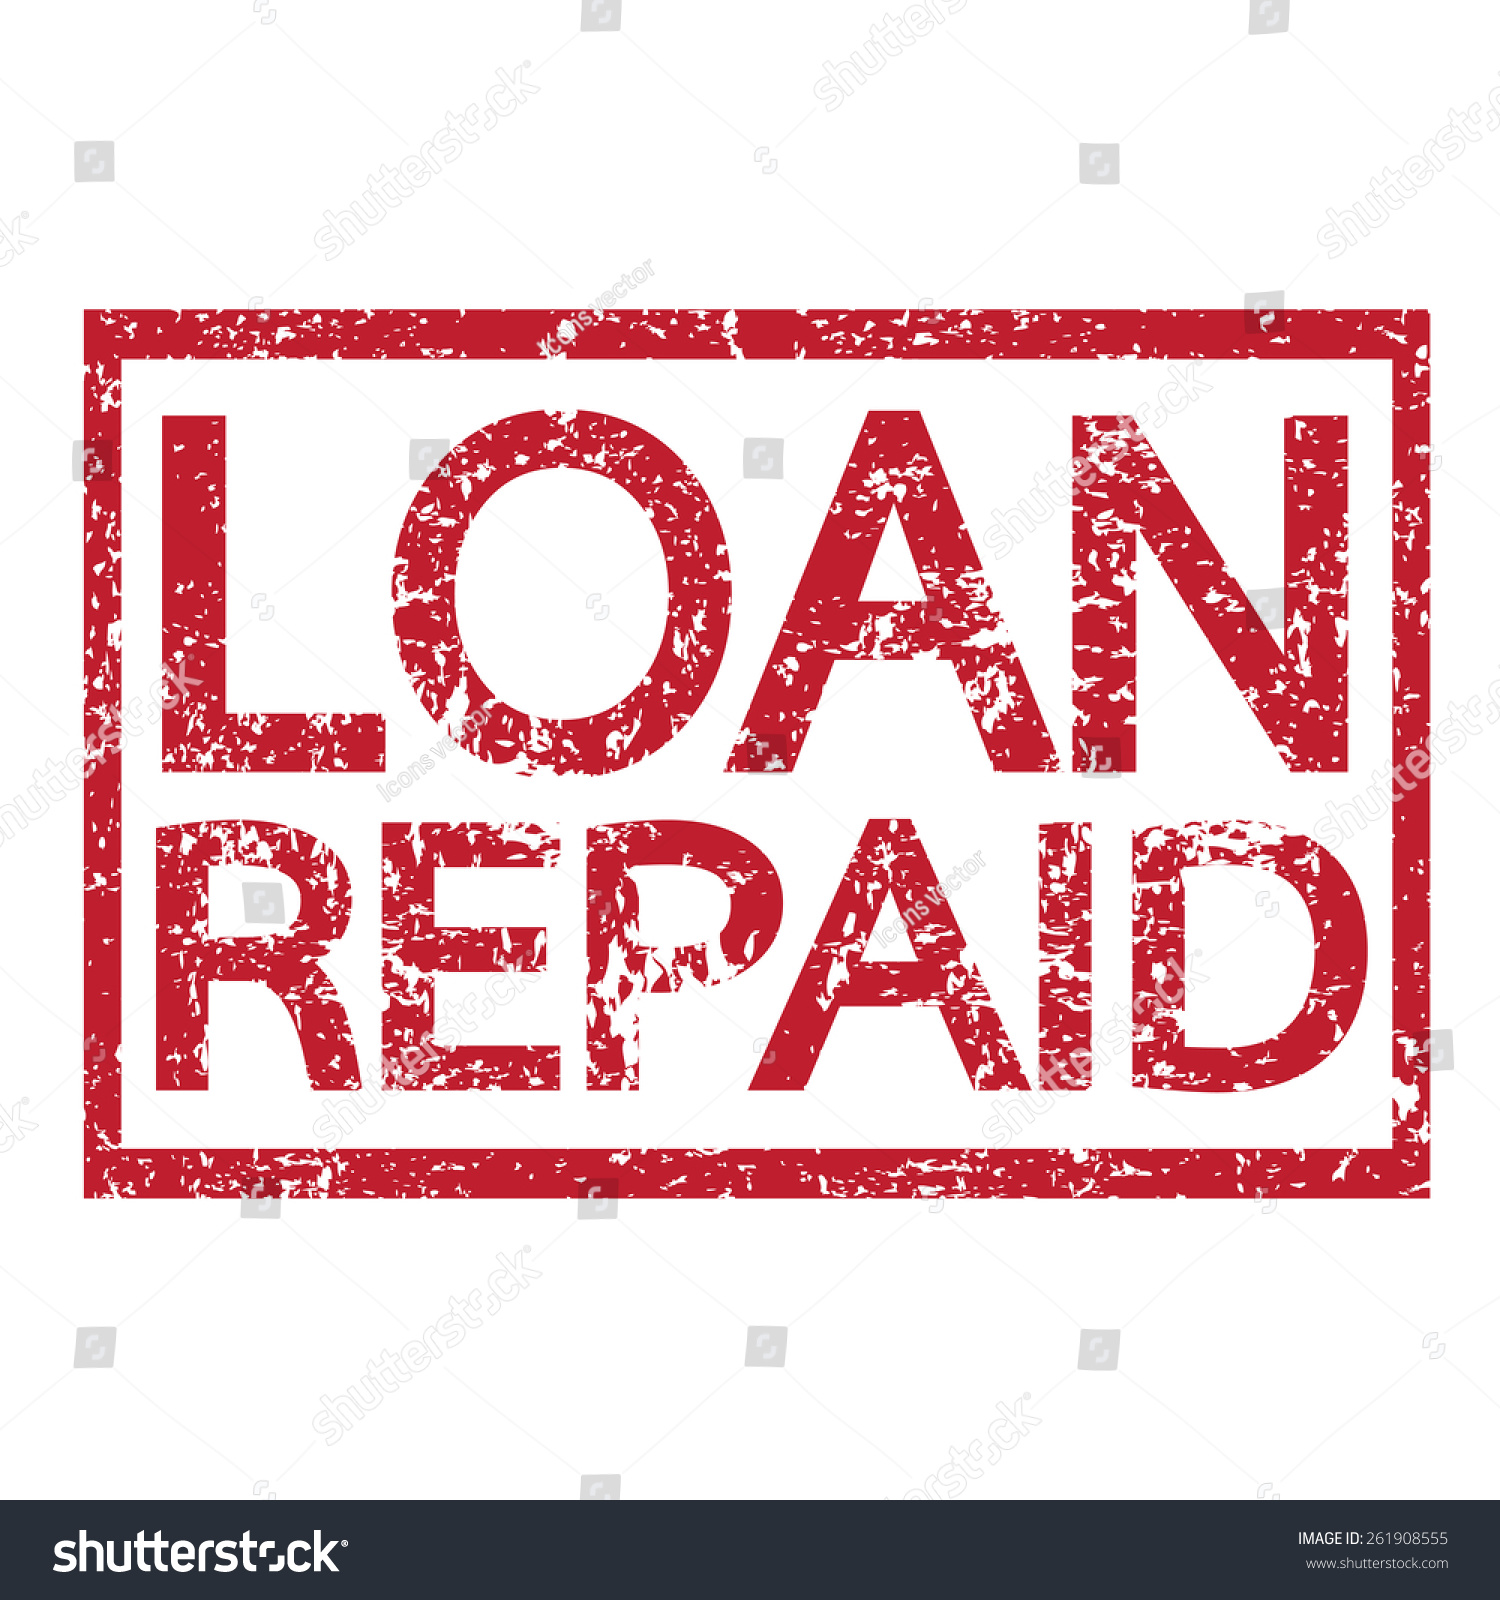 Stamp Text Loan Repaid Stock Vector Illustration 261908555 : Shutterstock